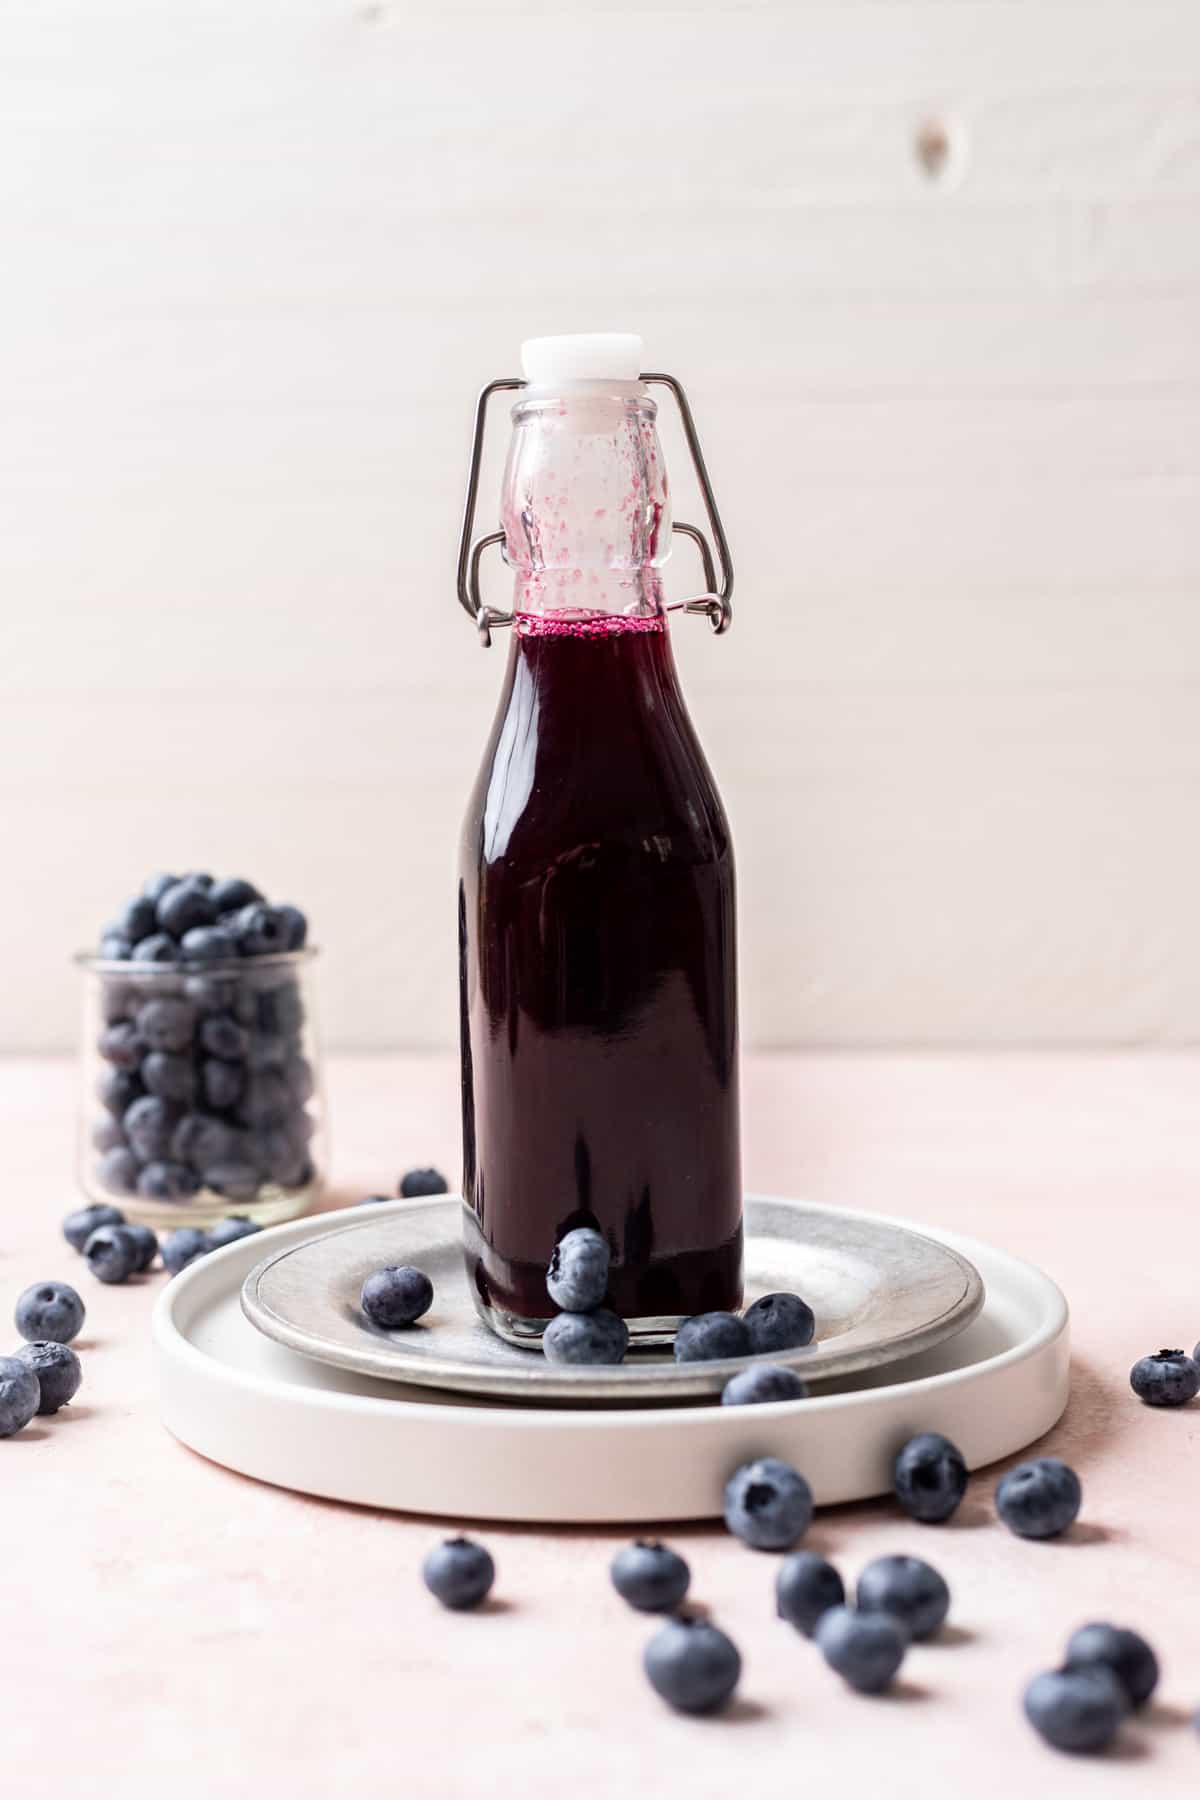 Blueberry simple syrup in a glass bottle surrounded by fresh blueberries.